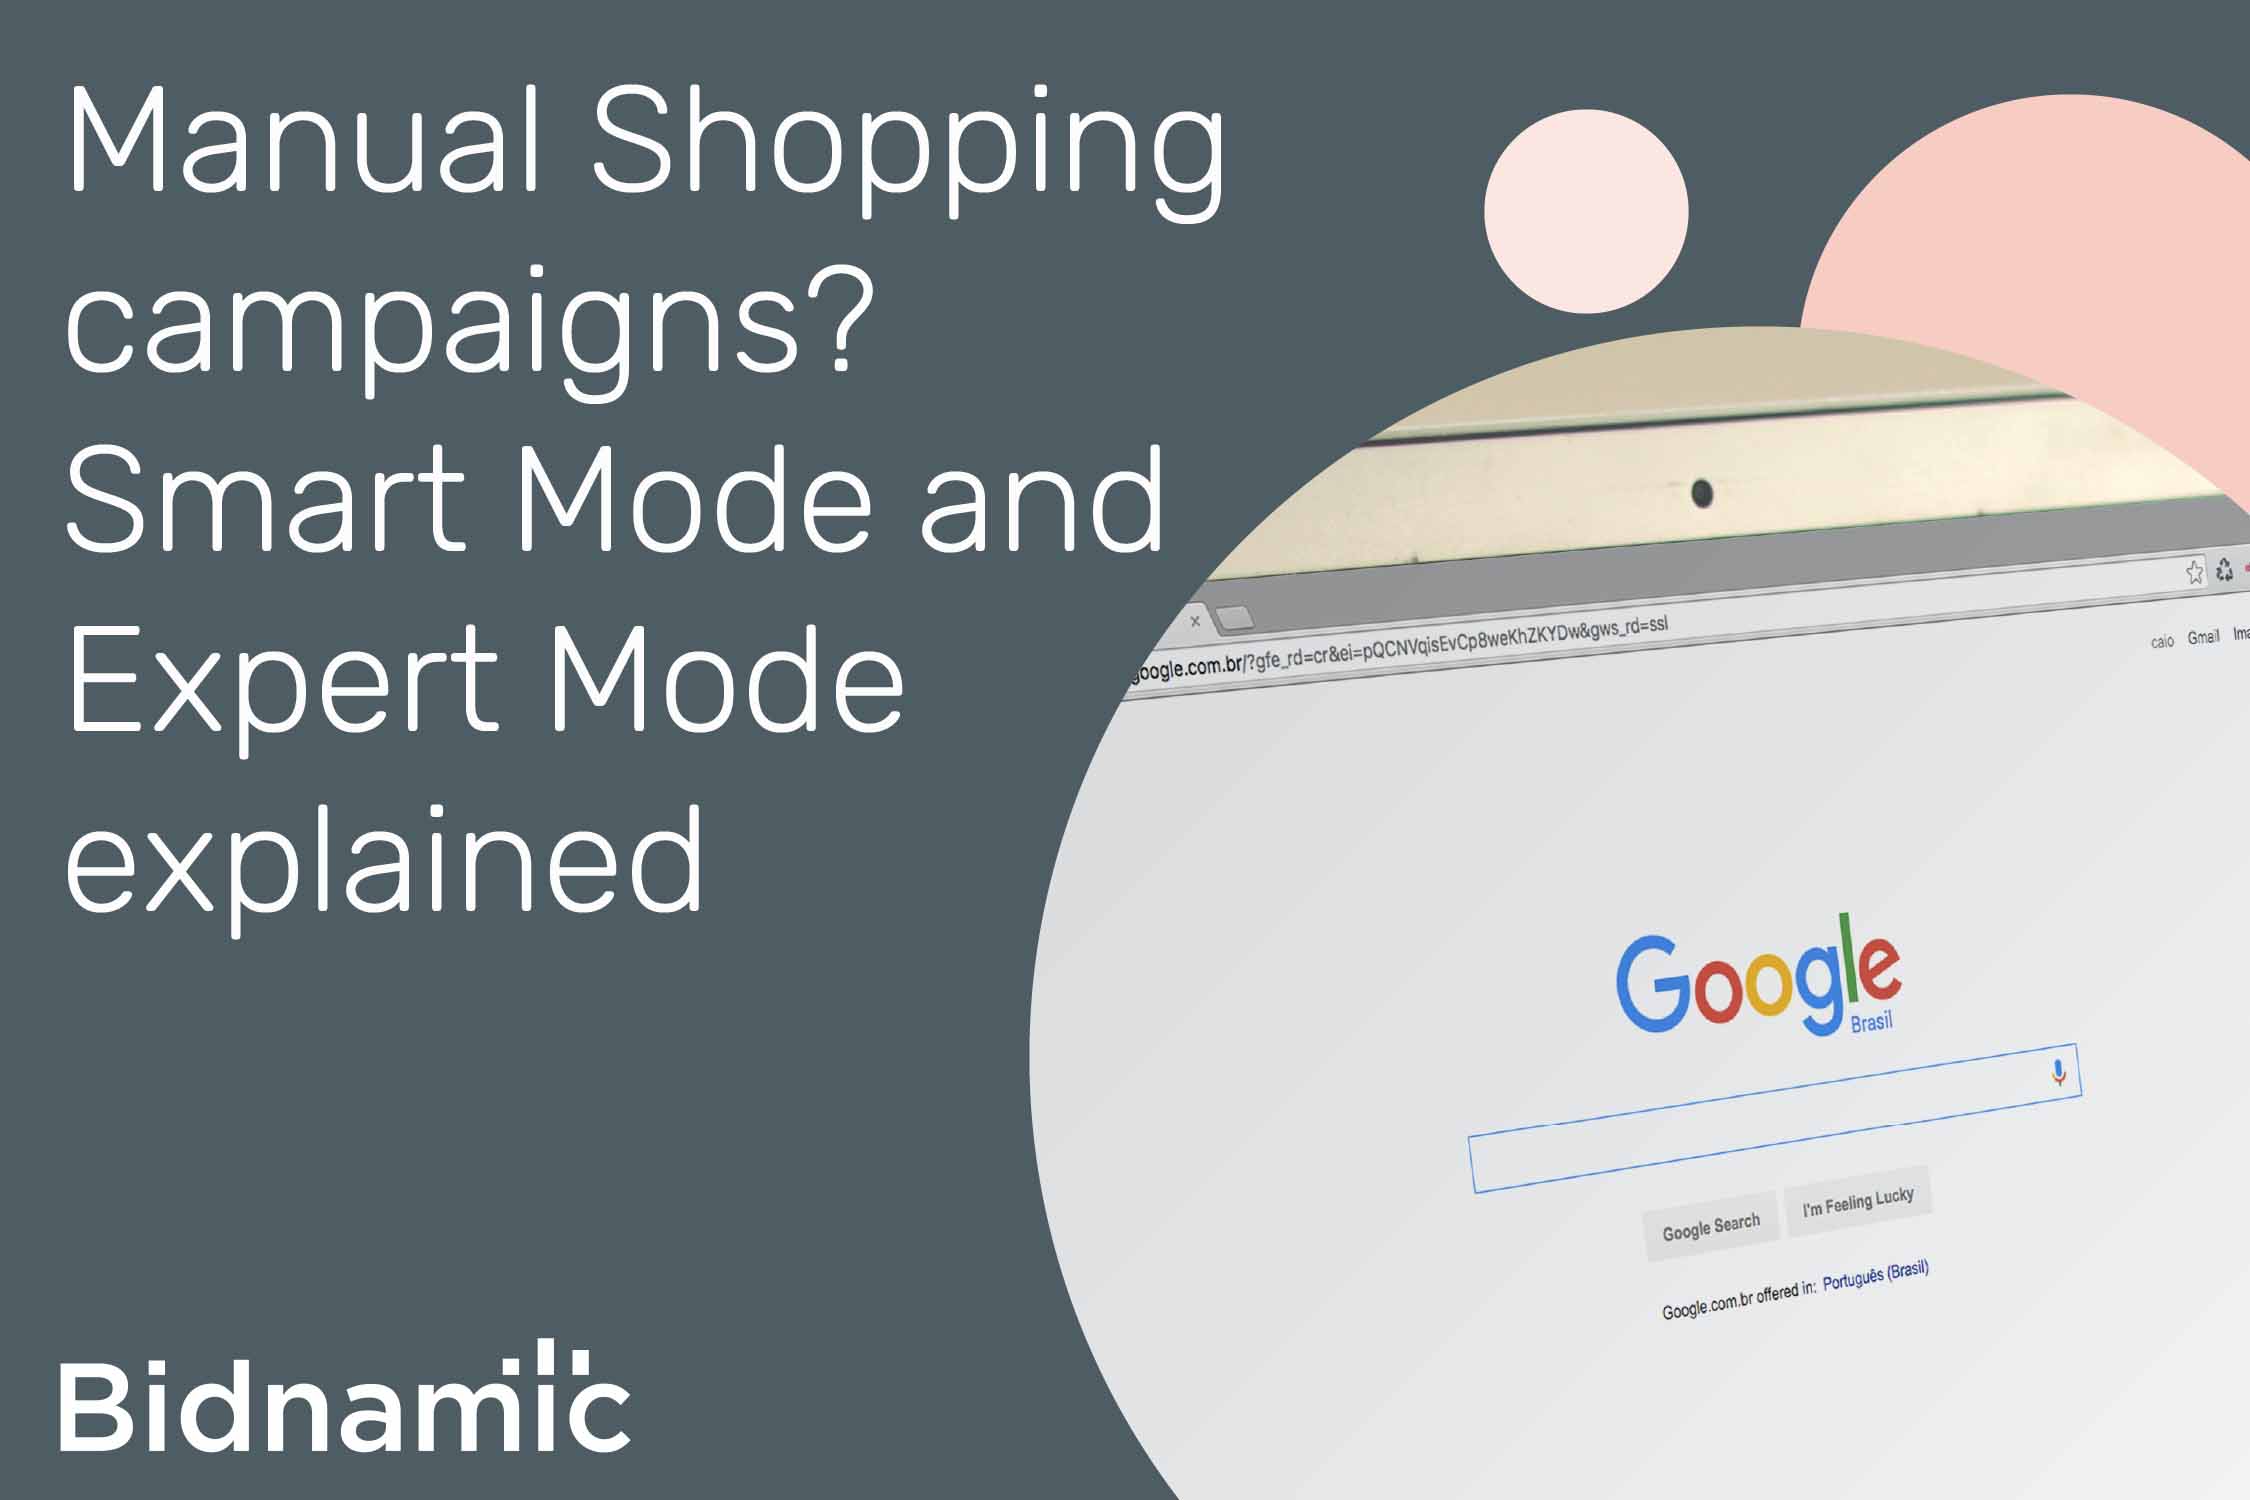 Is Google getting rid of manual campaign management? Smart Mode and Expert Mode explained